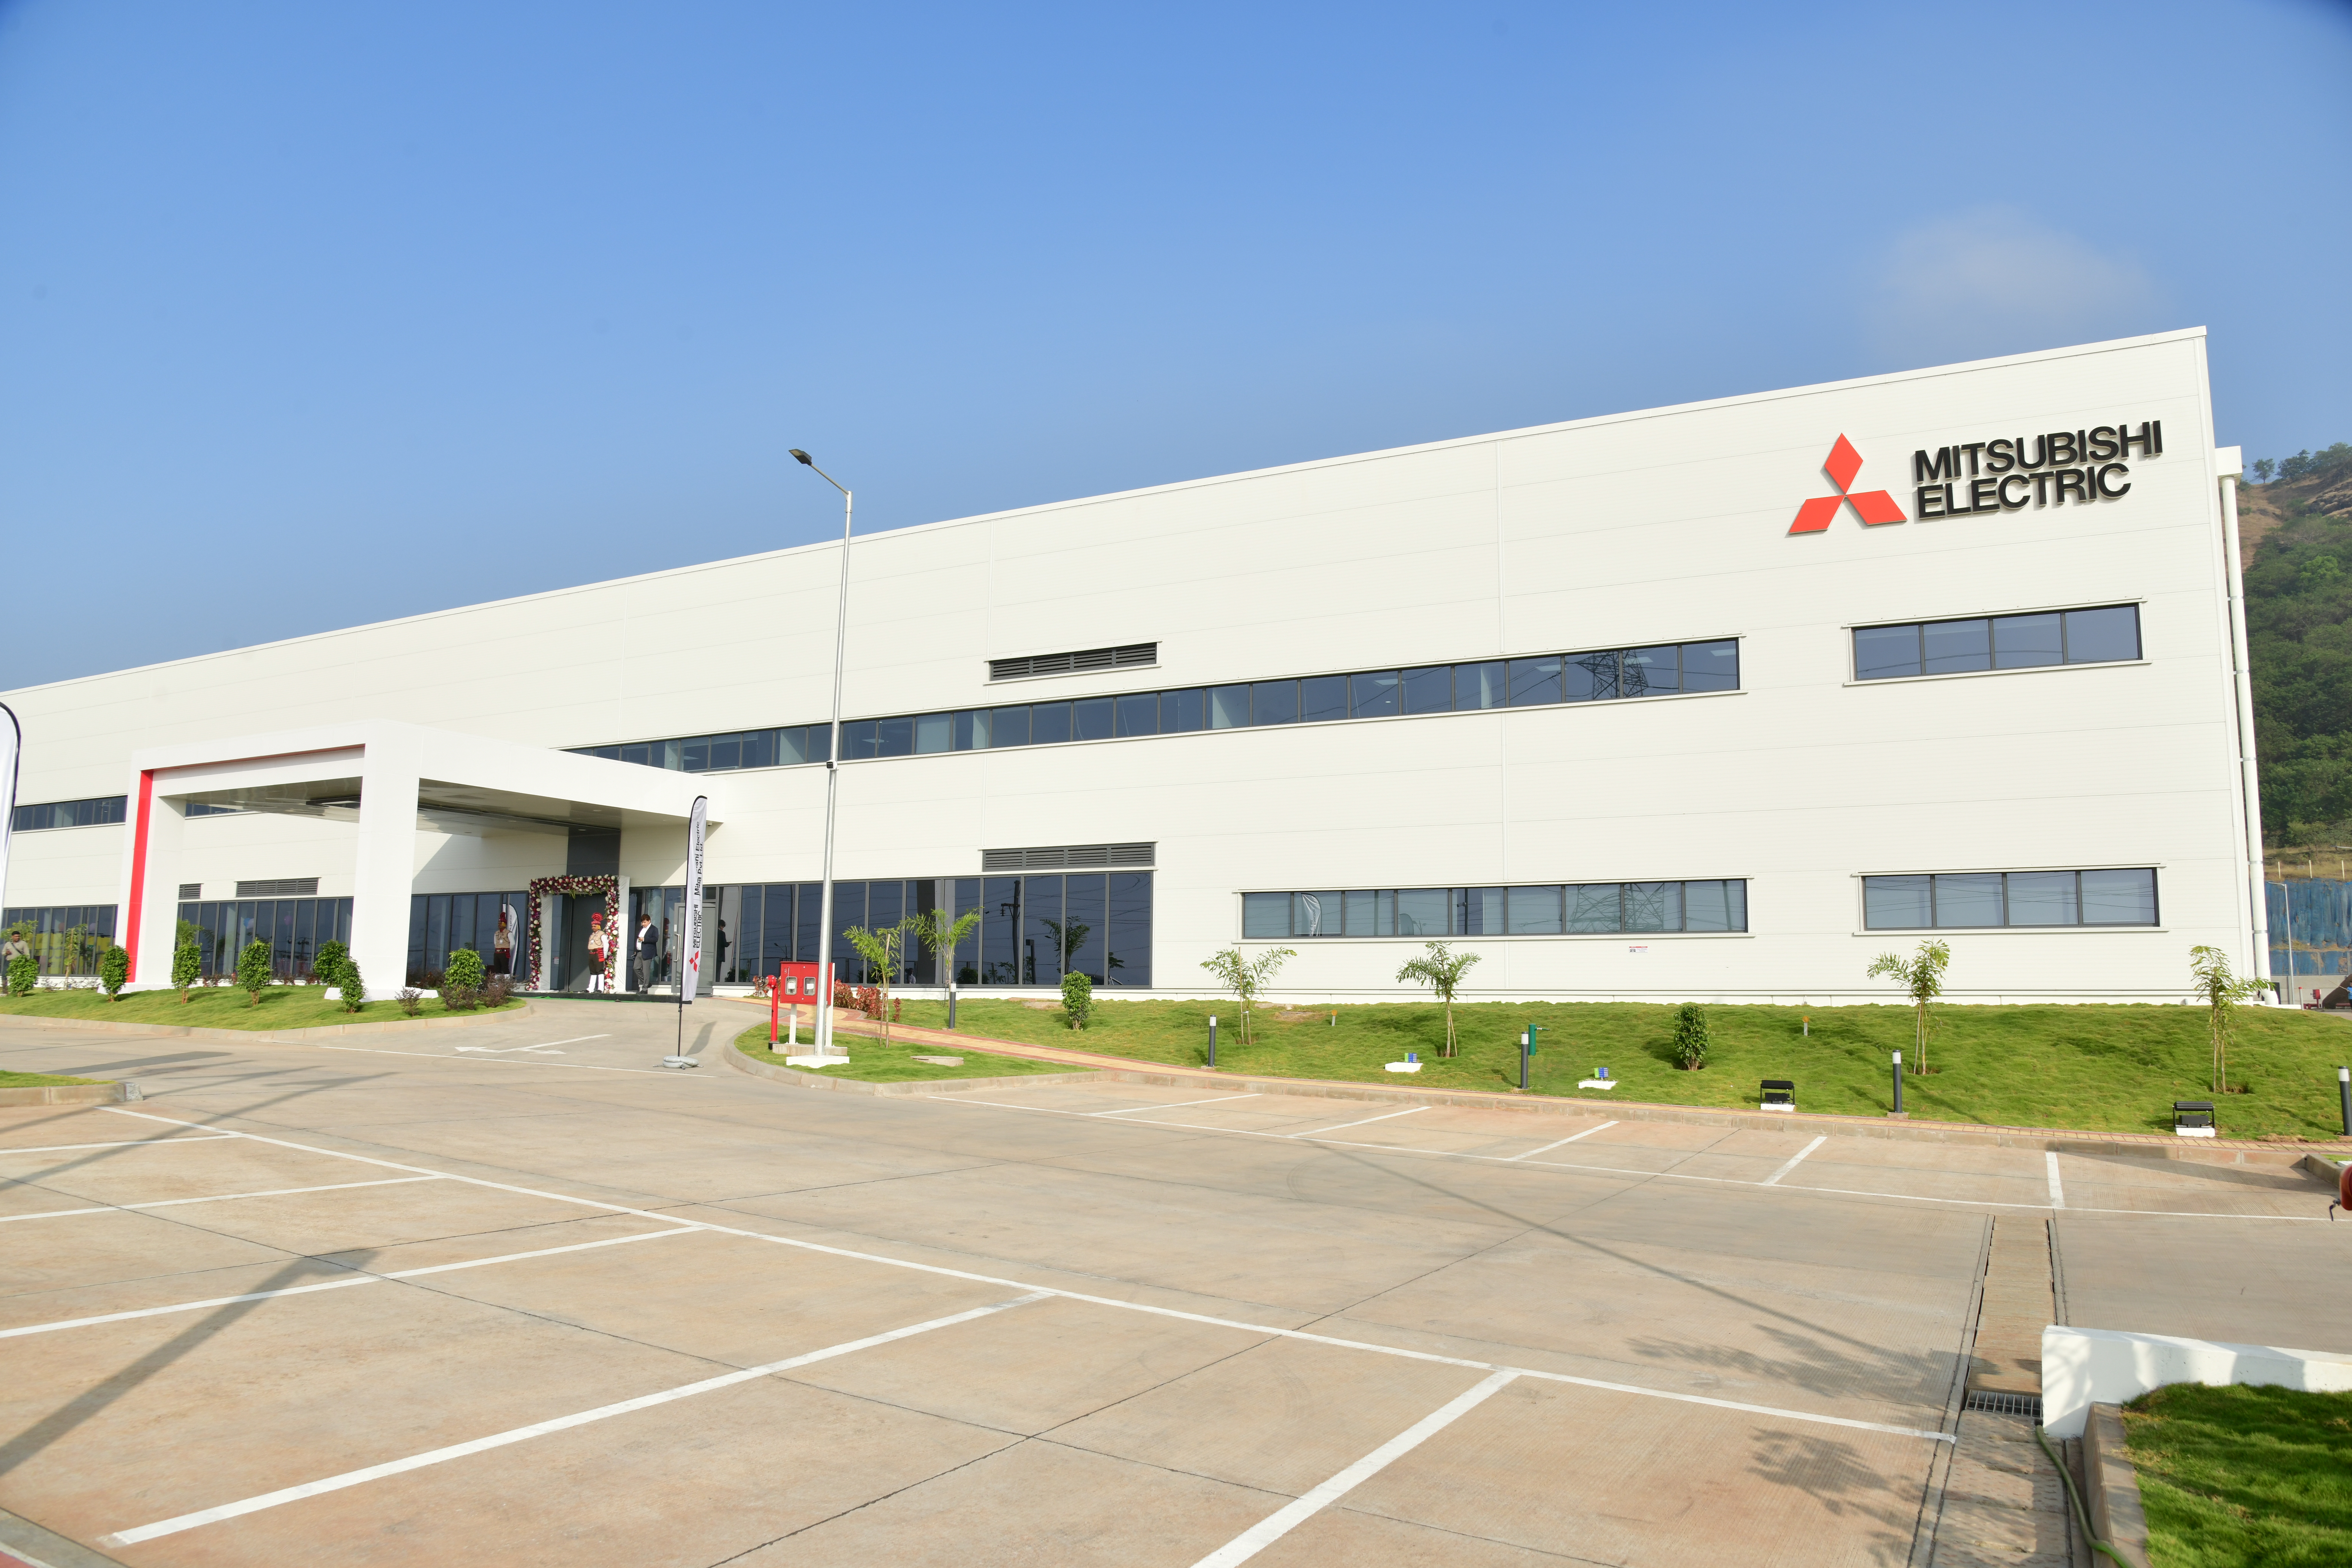 Mitsubishi Electric Inaugurates New Manufacturing Plant worth 2,200 MINR for Cutting-Edge Factory Automation Systems in Maharashtra, India